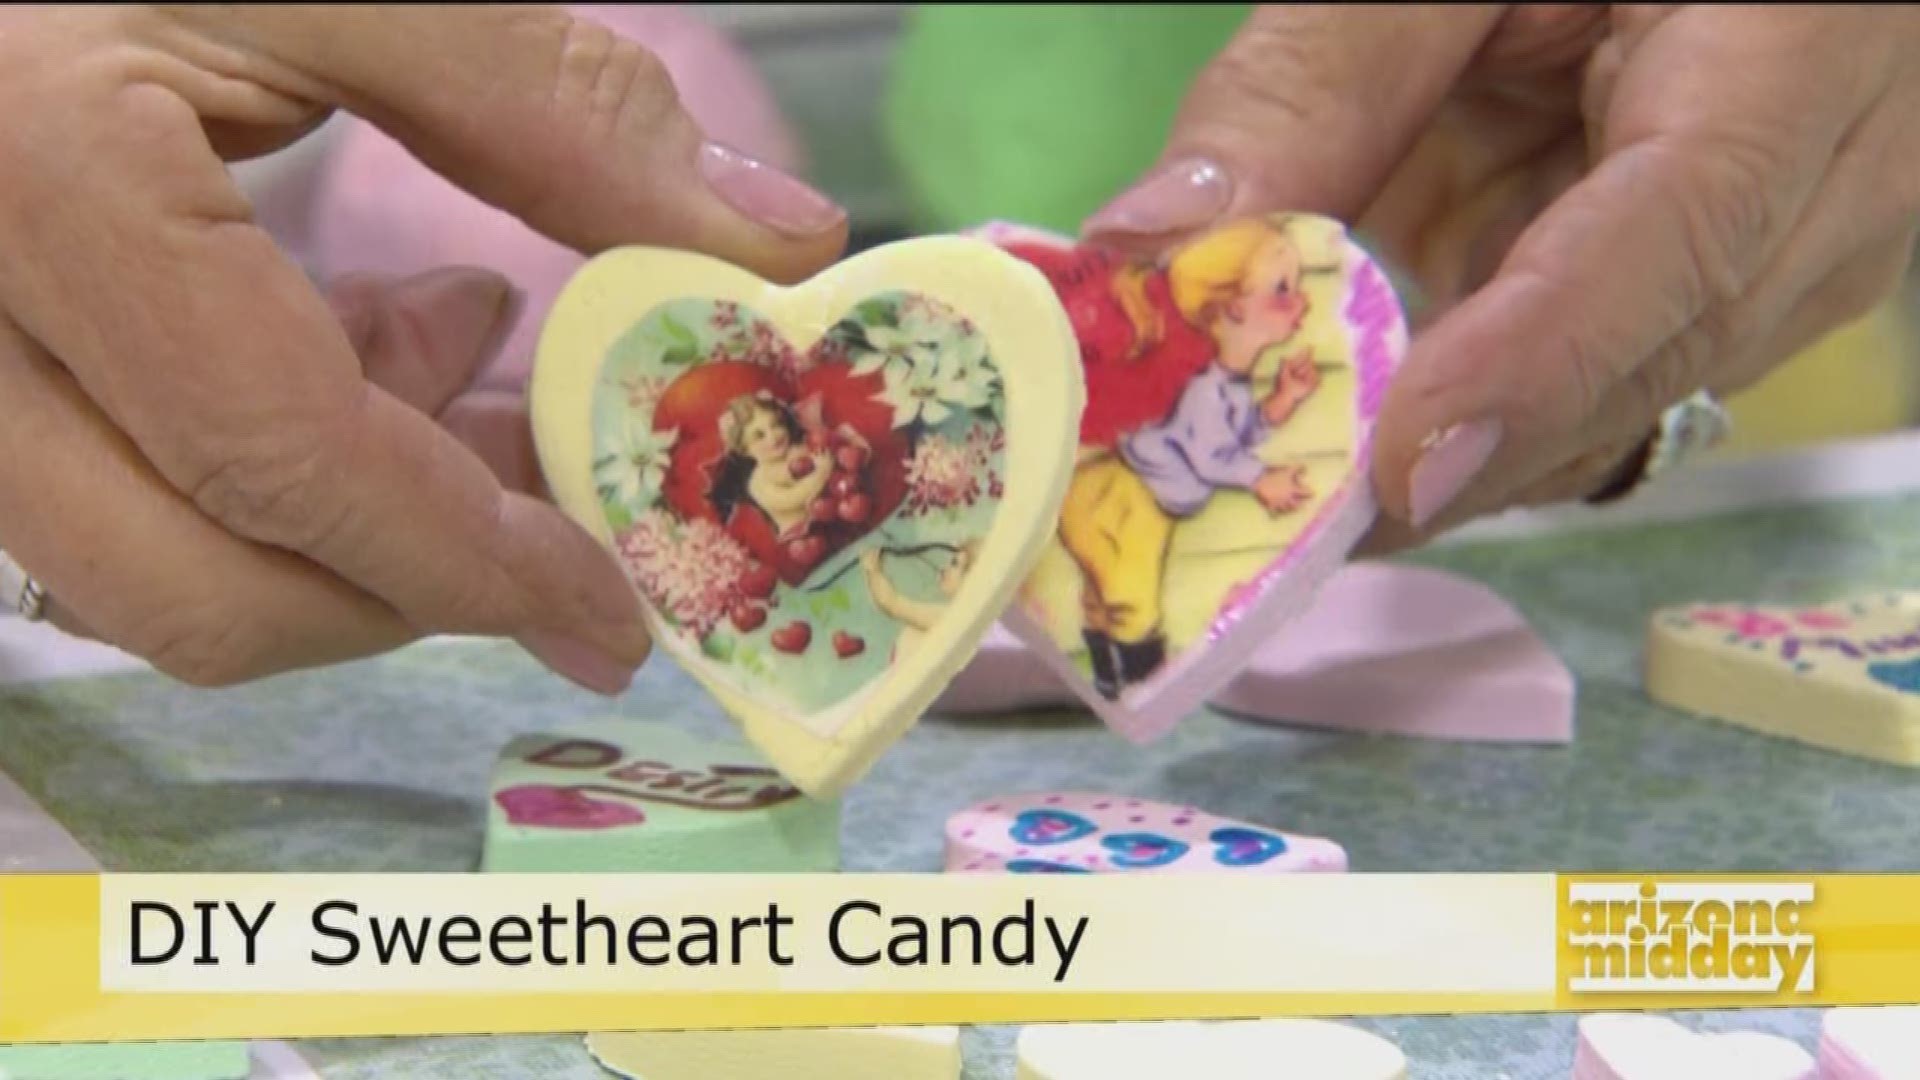 We HEART This Homemade Valentine's Day Treat. Jan shows us how to make our very own classic conversation hearts.